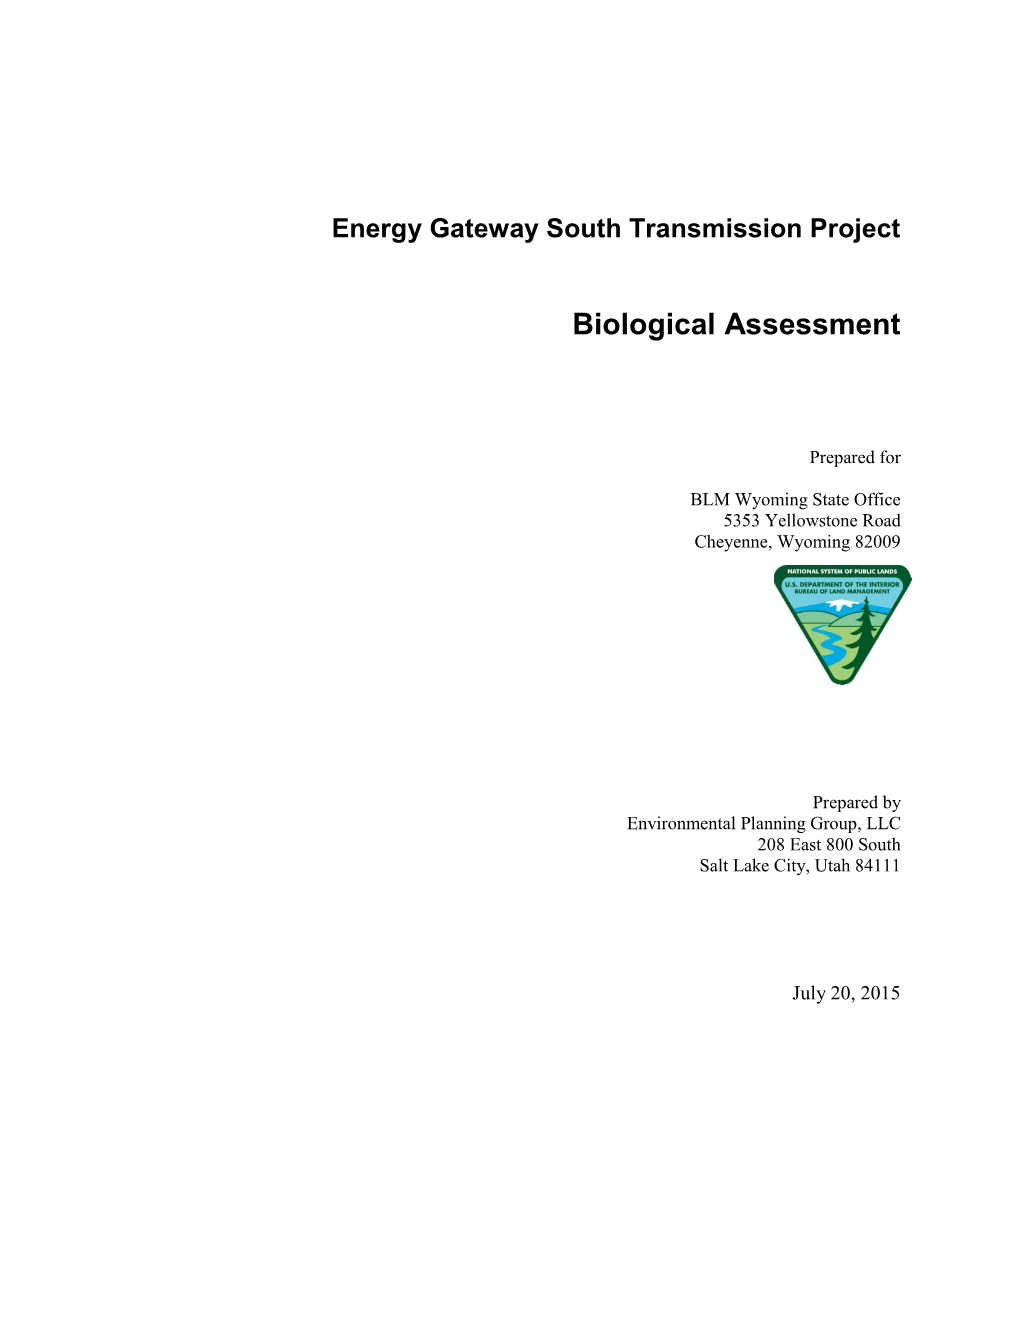 Energy Gateway South Transmission Project Biological Assessment